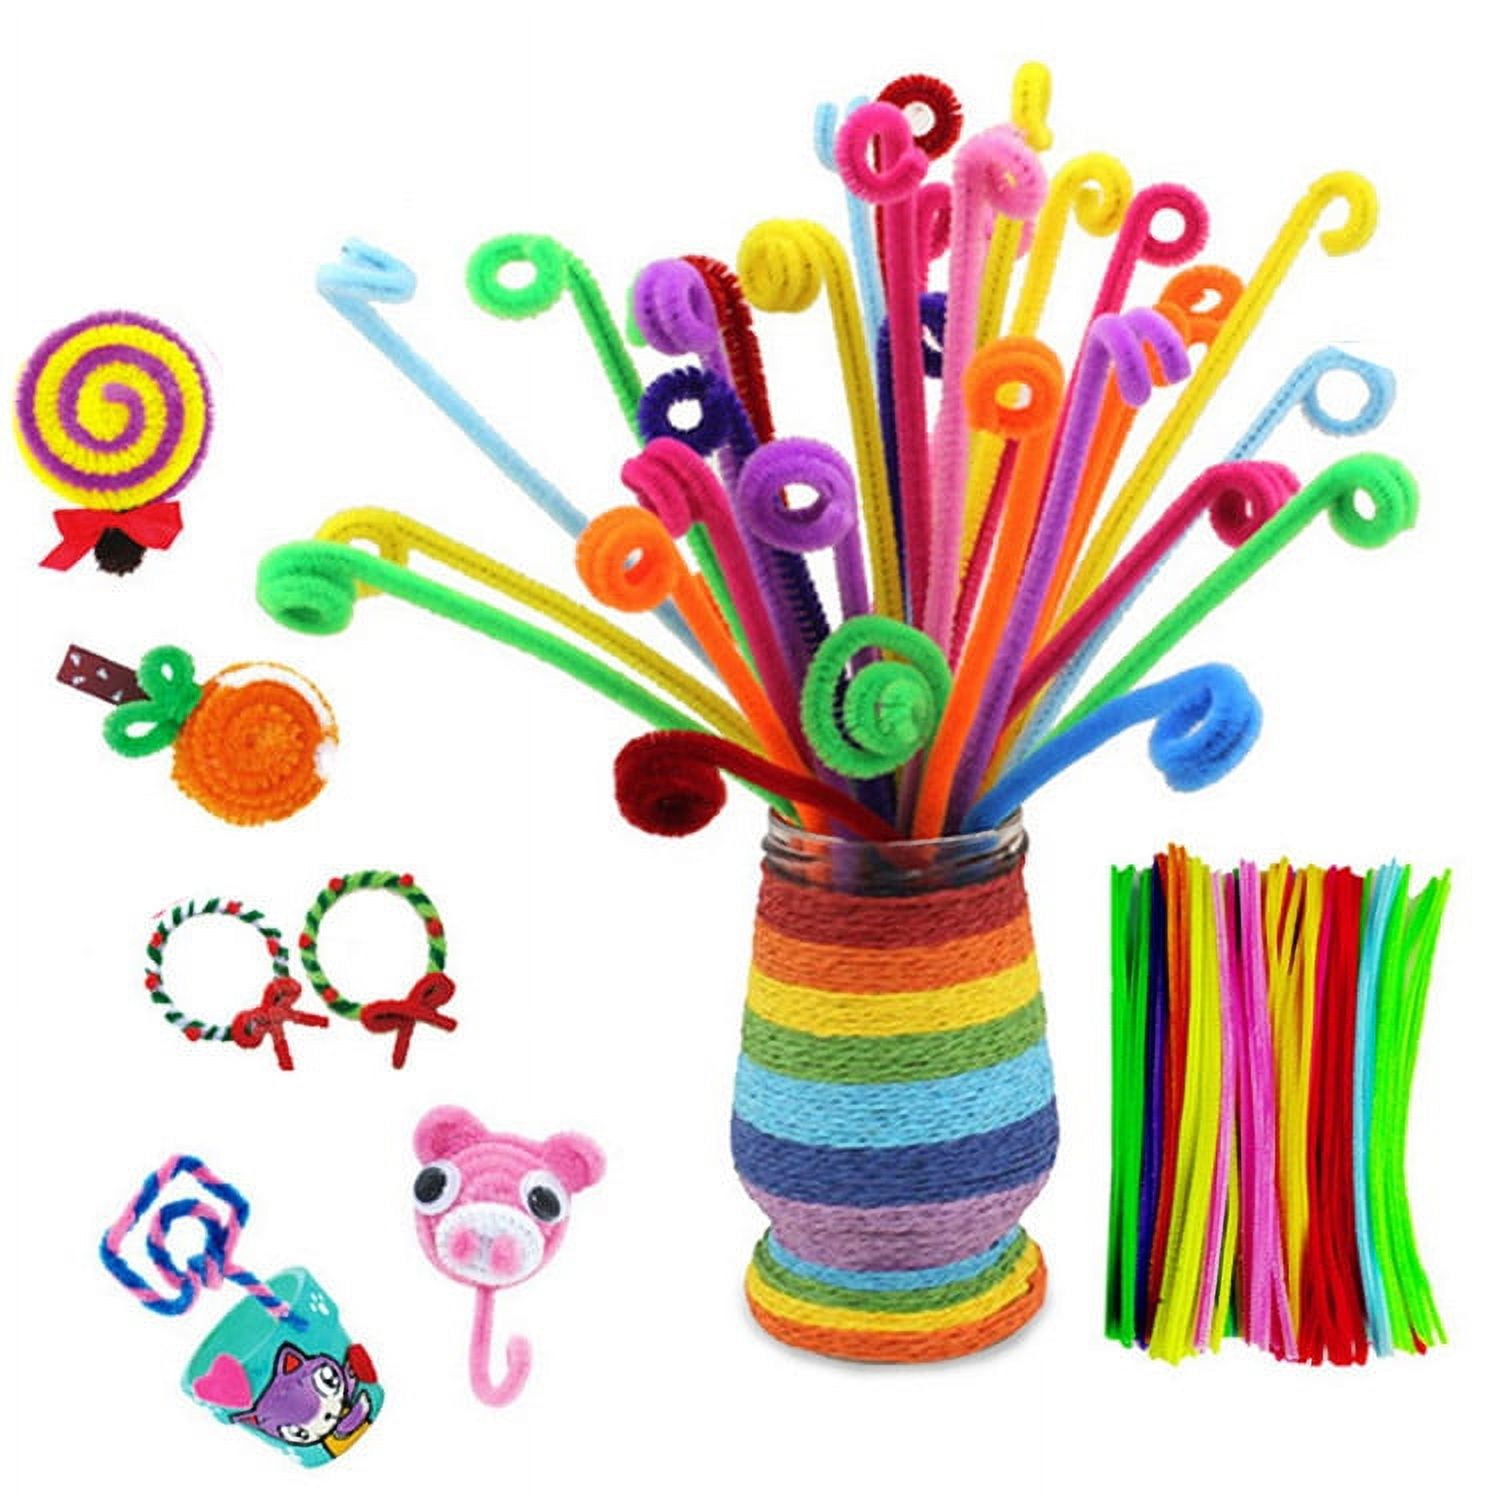 tinysiry 100 Pcs Pipe Cleaners, 7 Colors Chenille Stems for DIY Art  Creative Crafts Project Decorations (6.5 mm x 12 Inch) Pink